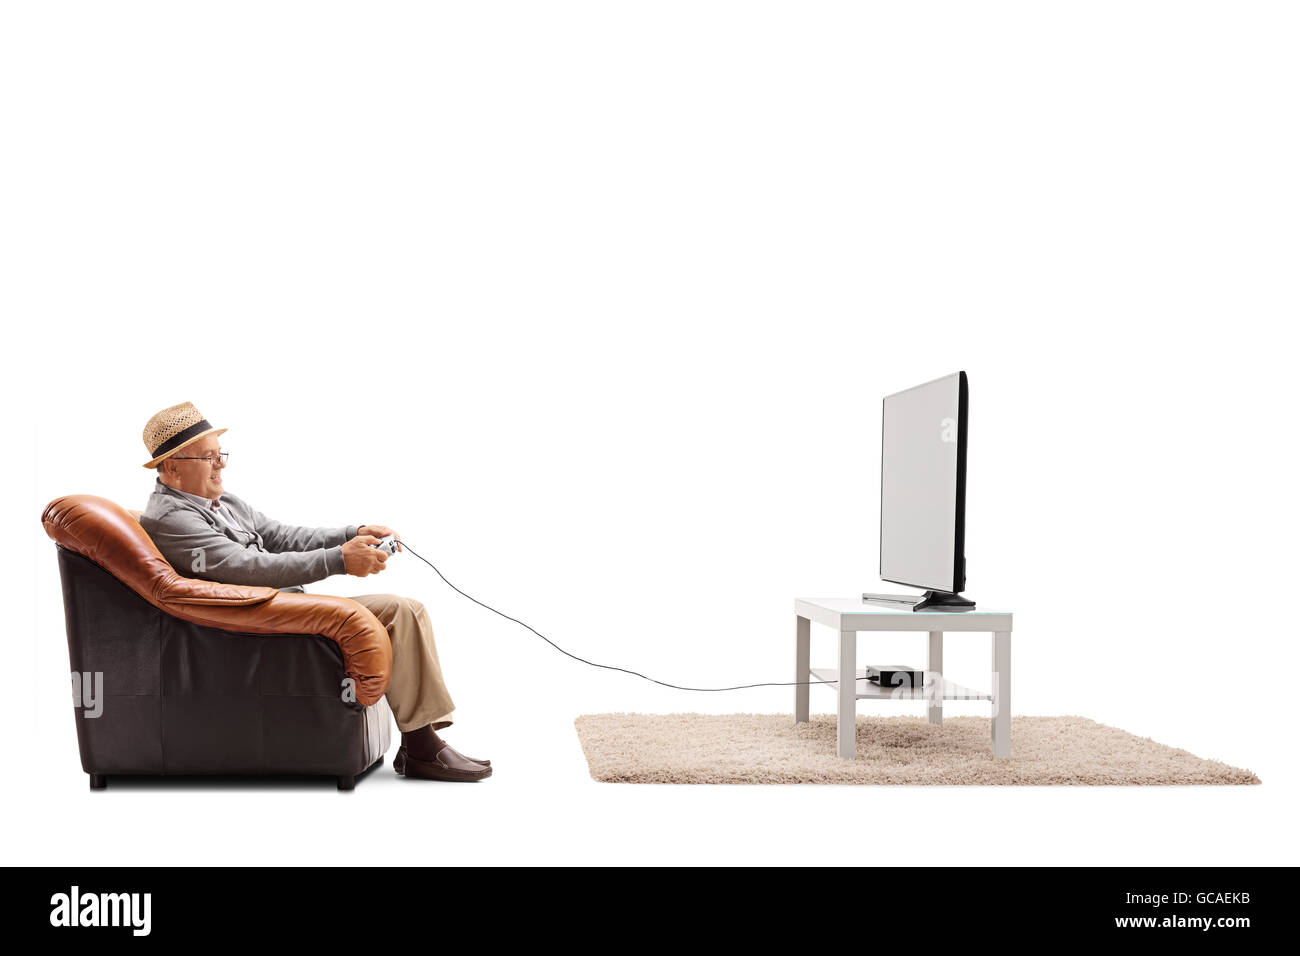 Studio shot of a joyful senior playing video games seated on an armchair isolated on white background Stock Photo